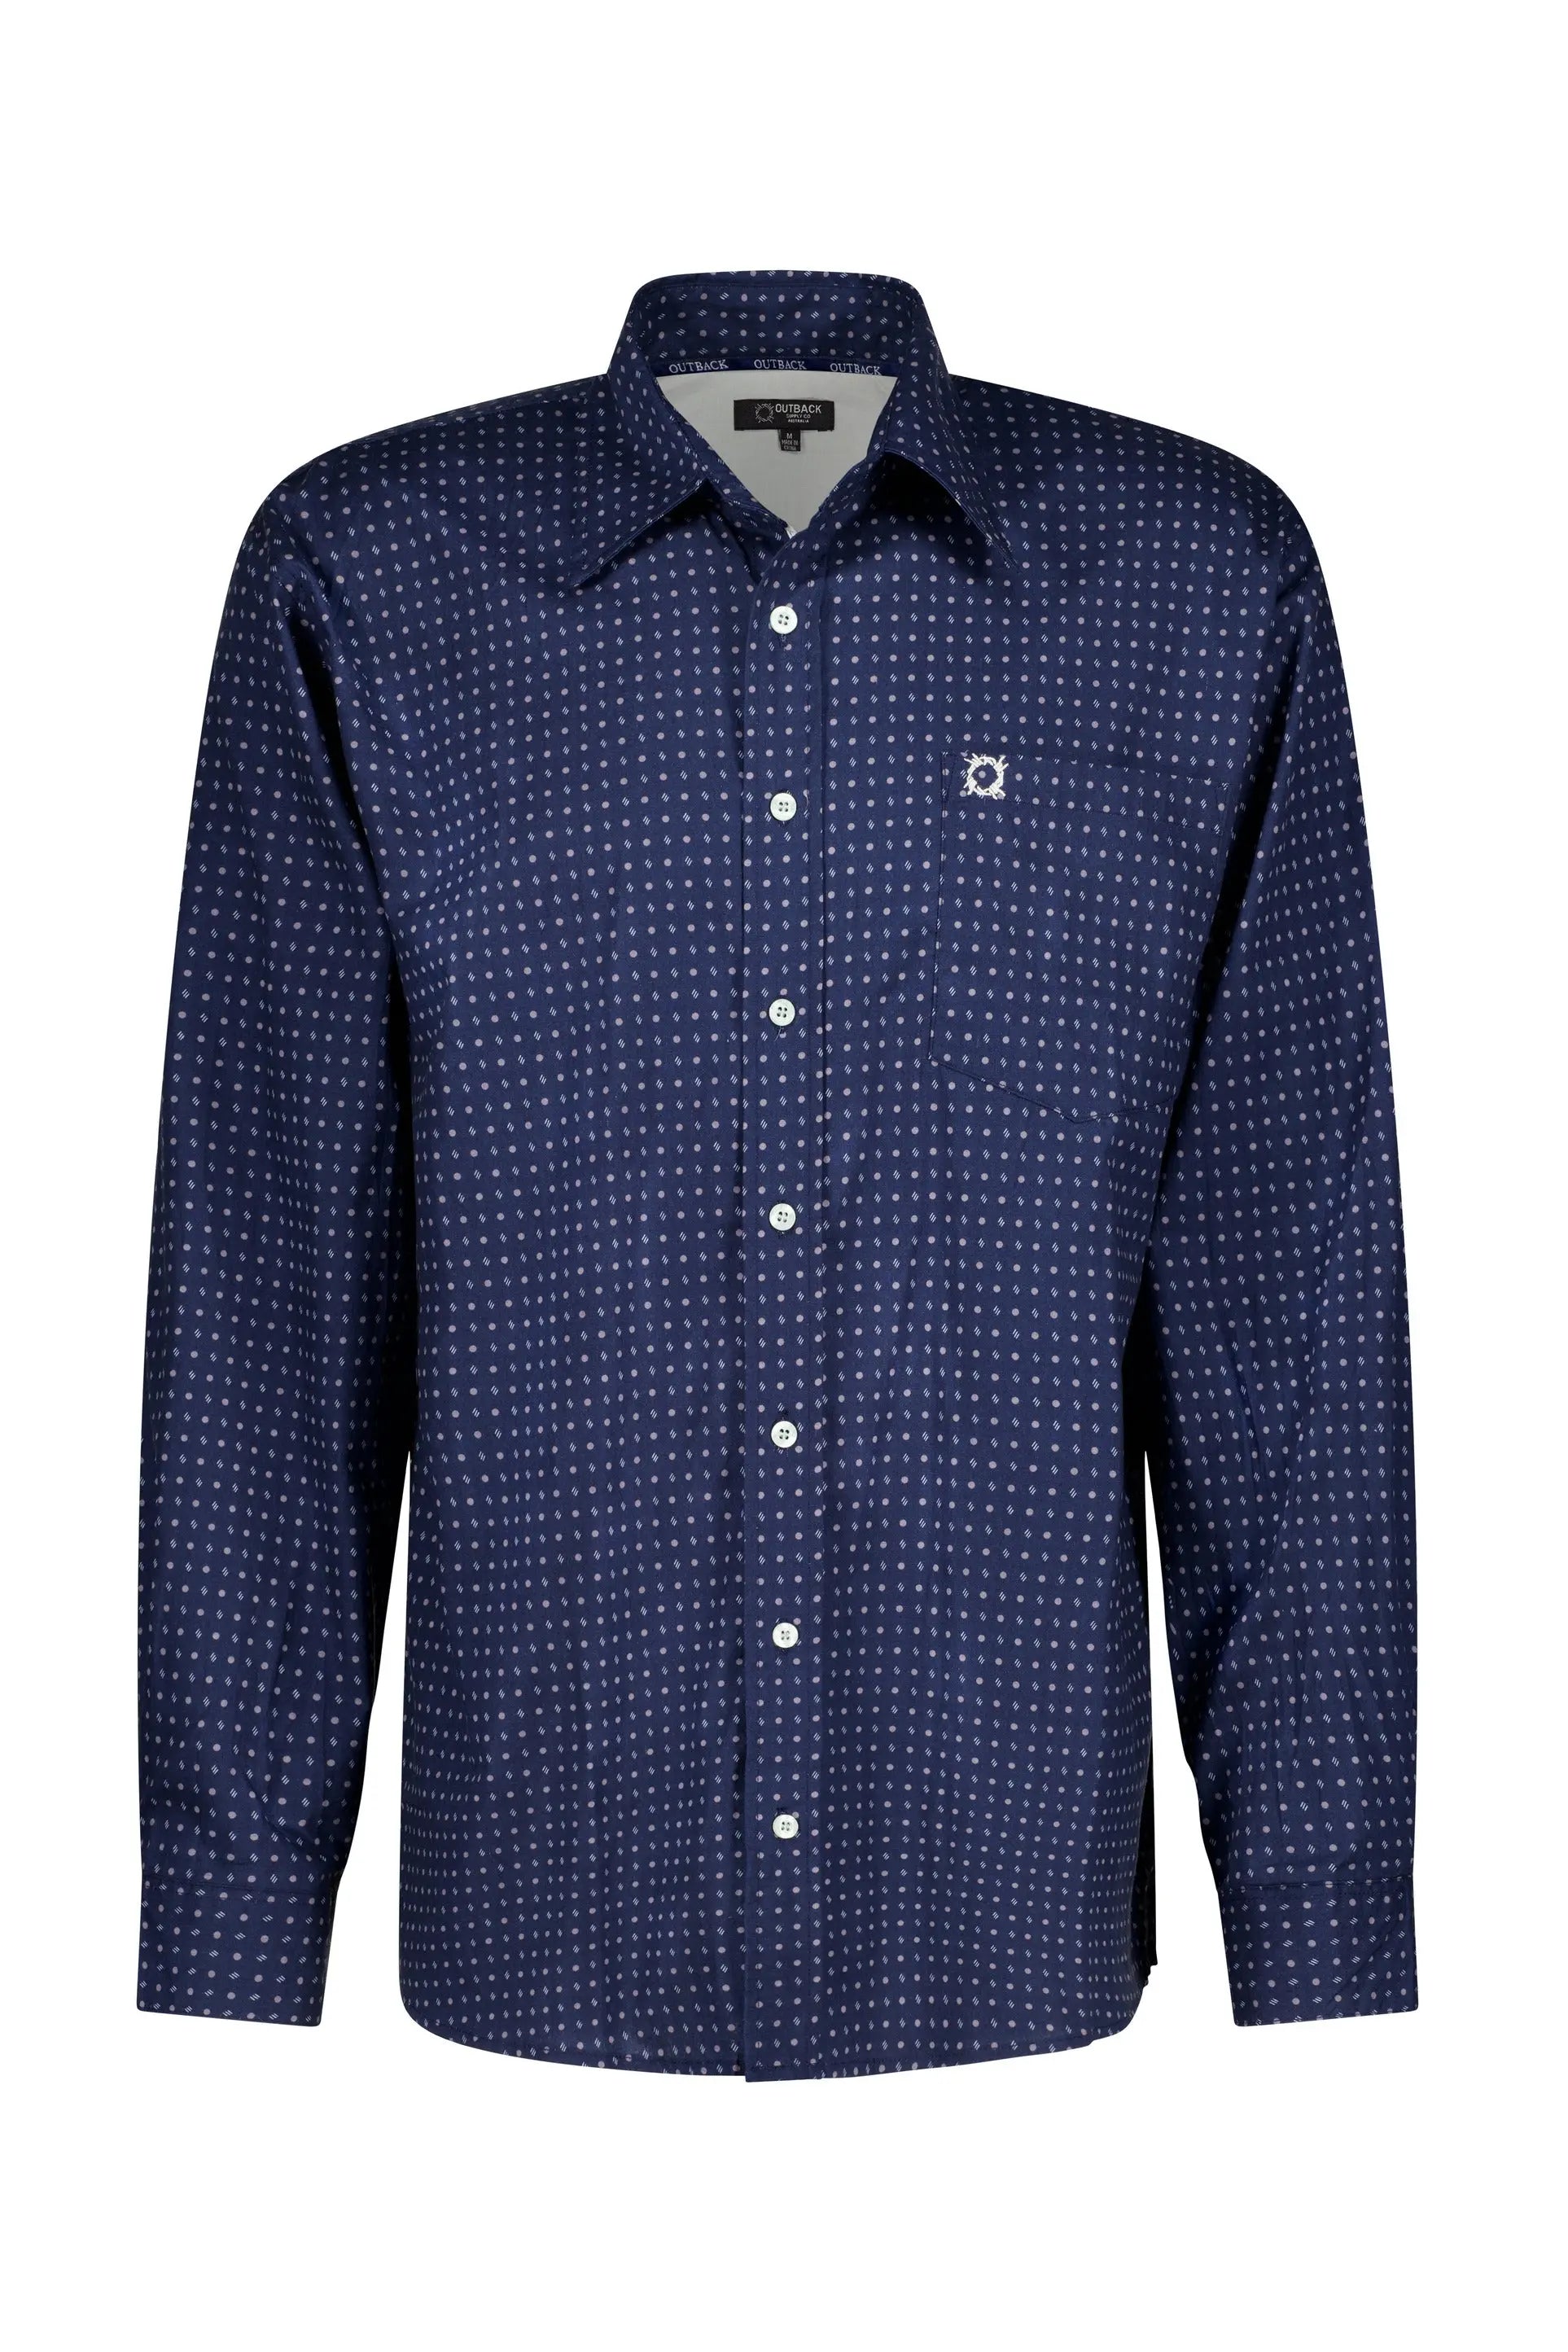 Navy Grey Classic Cotton Shirt Outback Supply Co